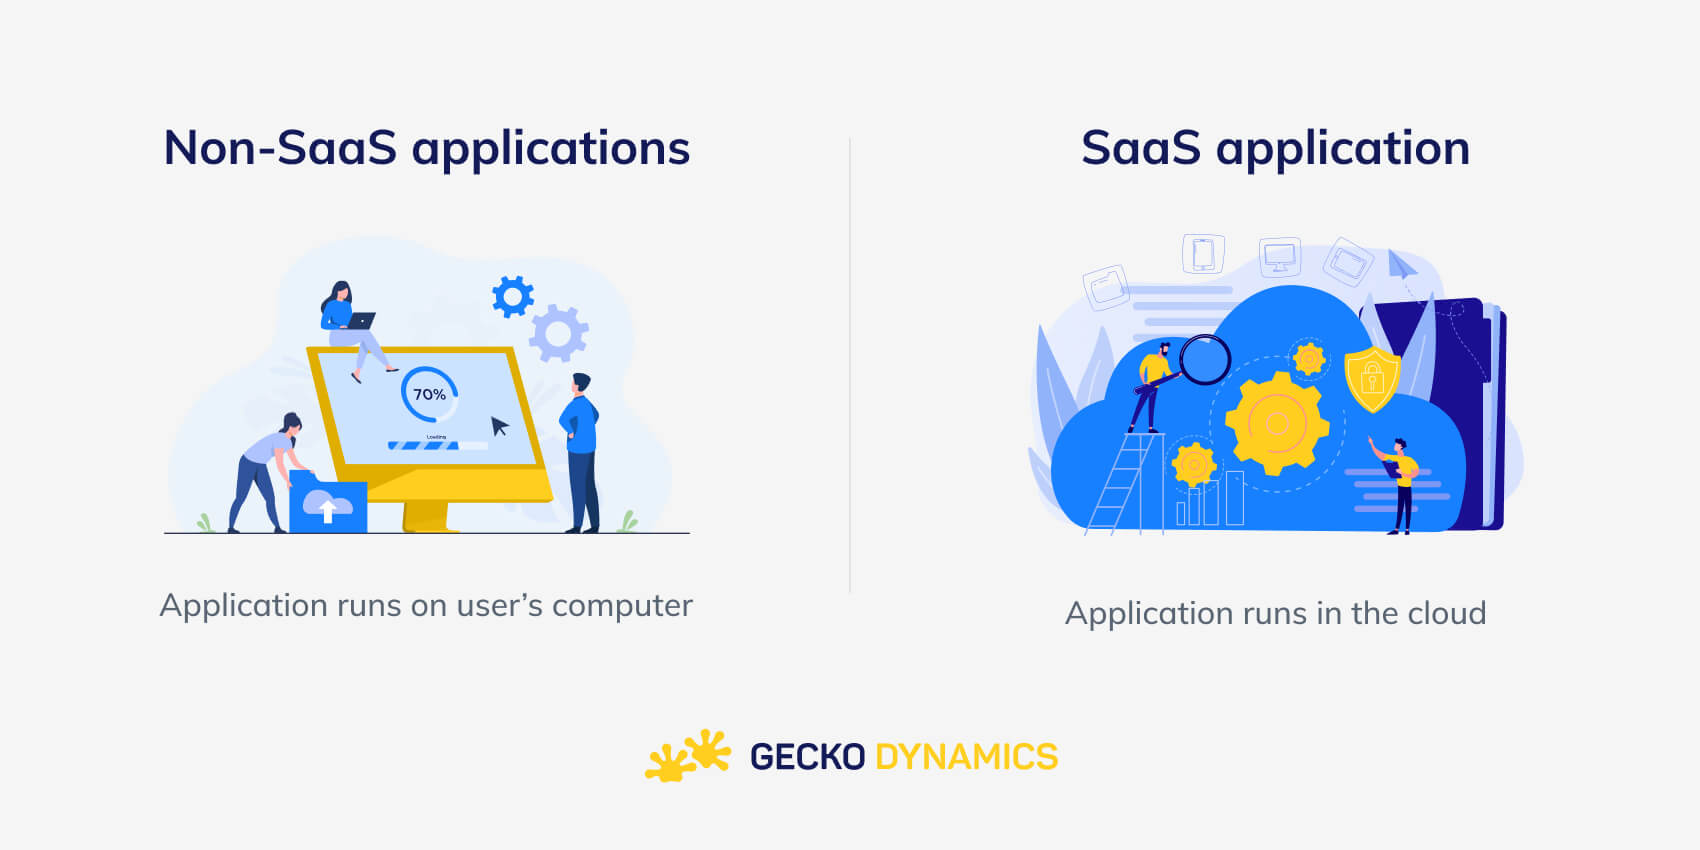 difference between Non-SaaS and Saas applications